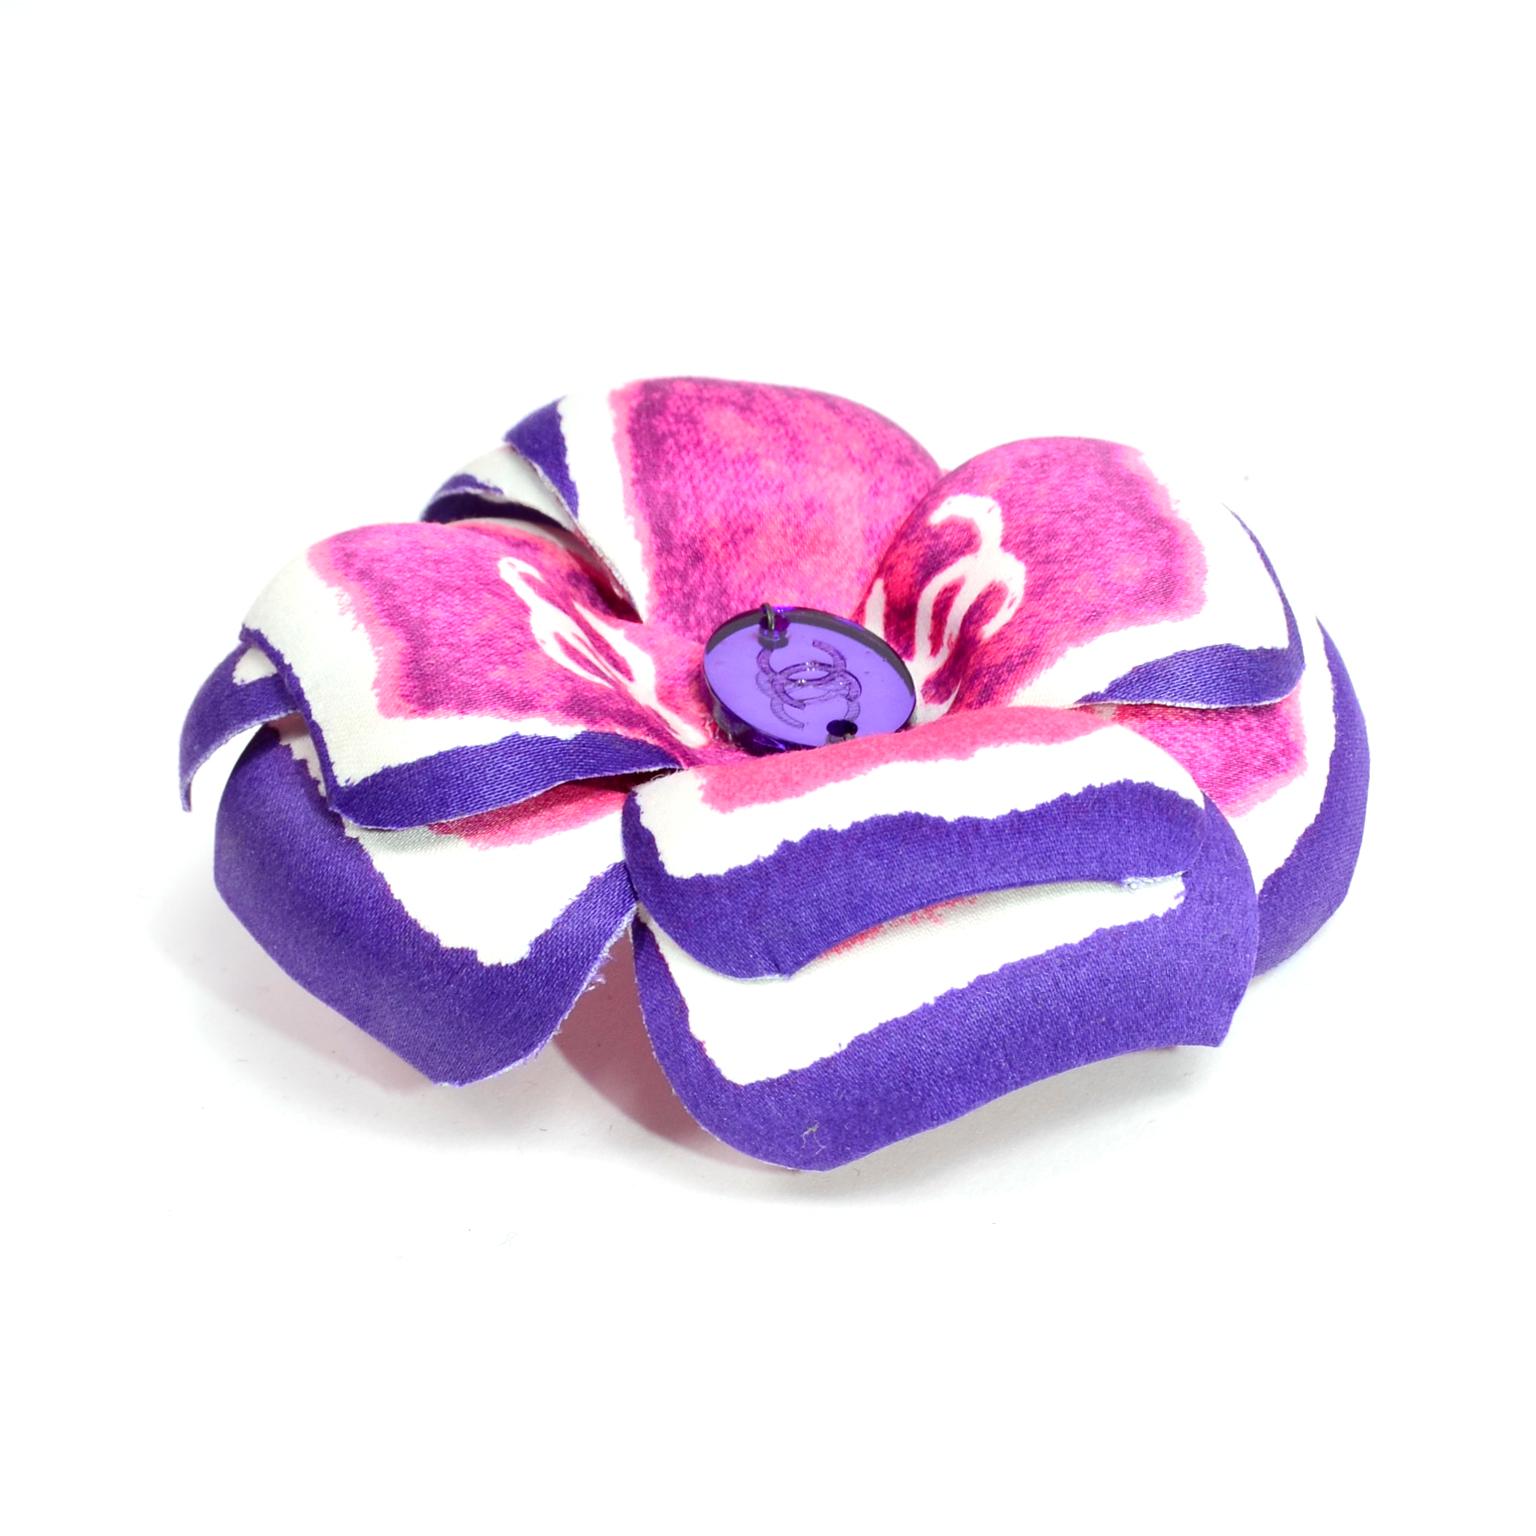 Women's Chanel Spring 2001 Violet and Pink Camellia Flower Brooch W Tags & Original Box